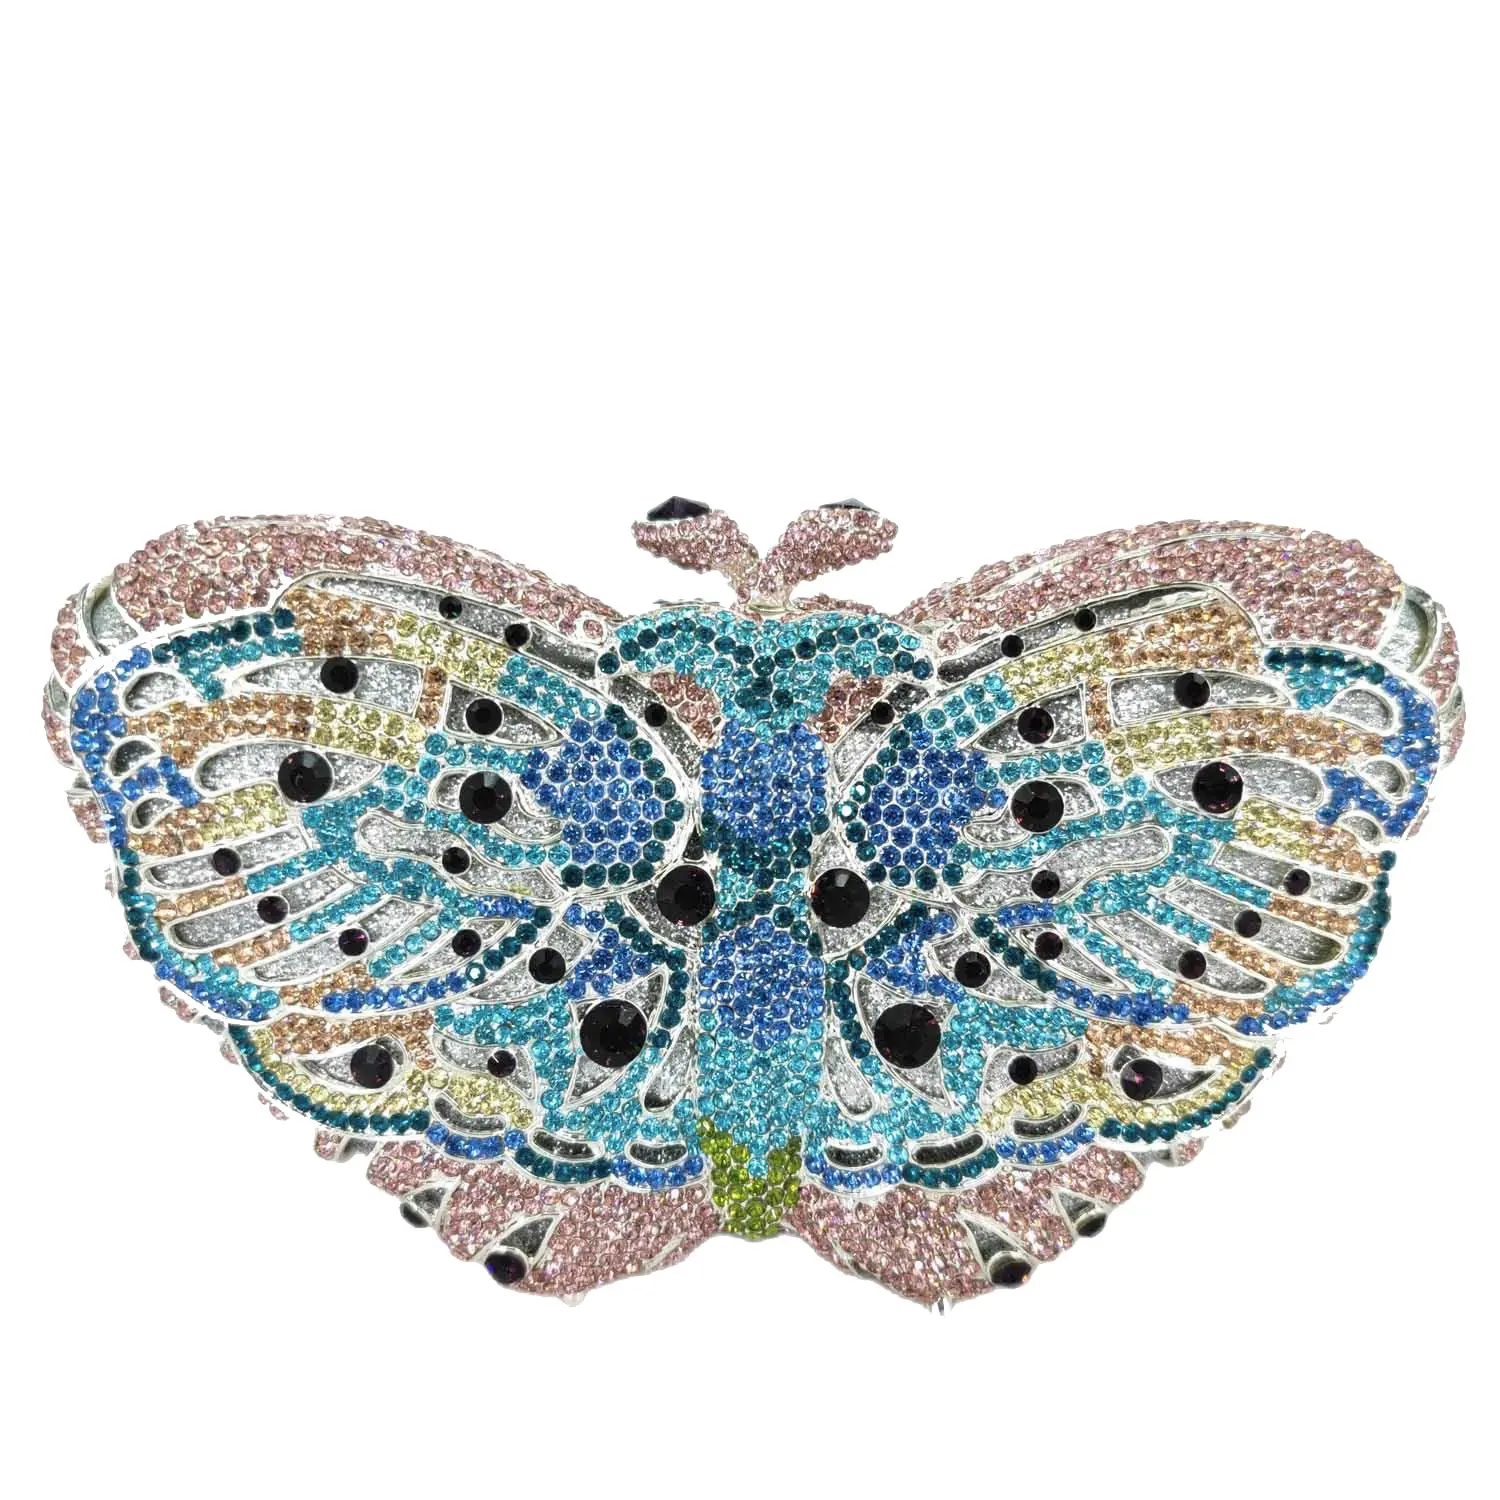 Handmade Butterfly Crystal Wedding Bridal Party Prom Cocktail Evening Bag Clutch 